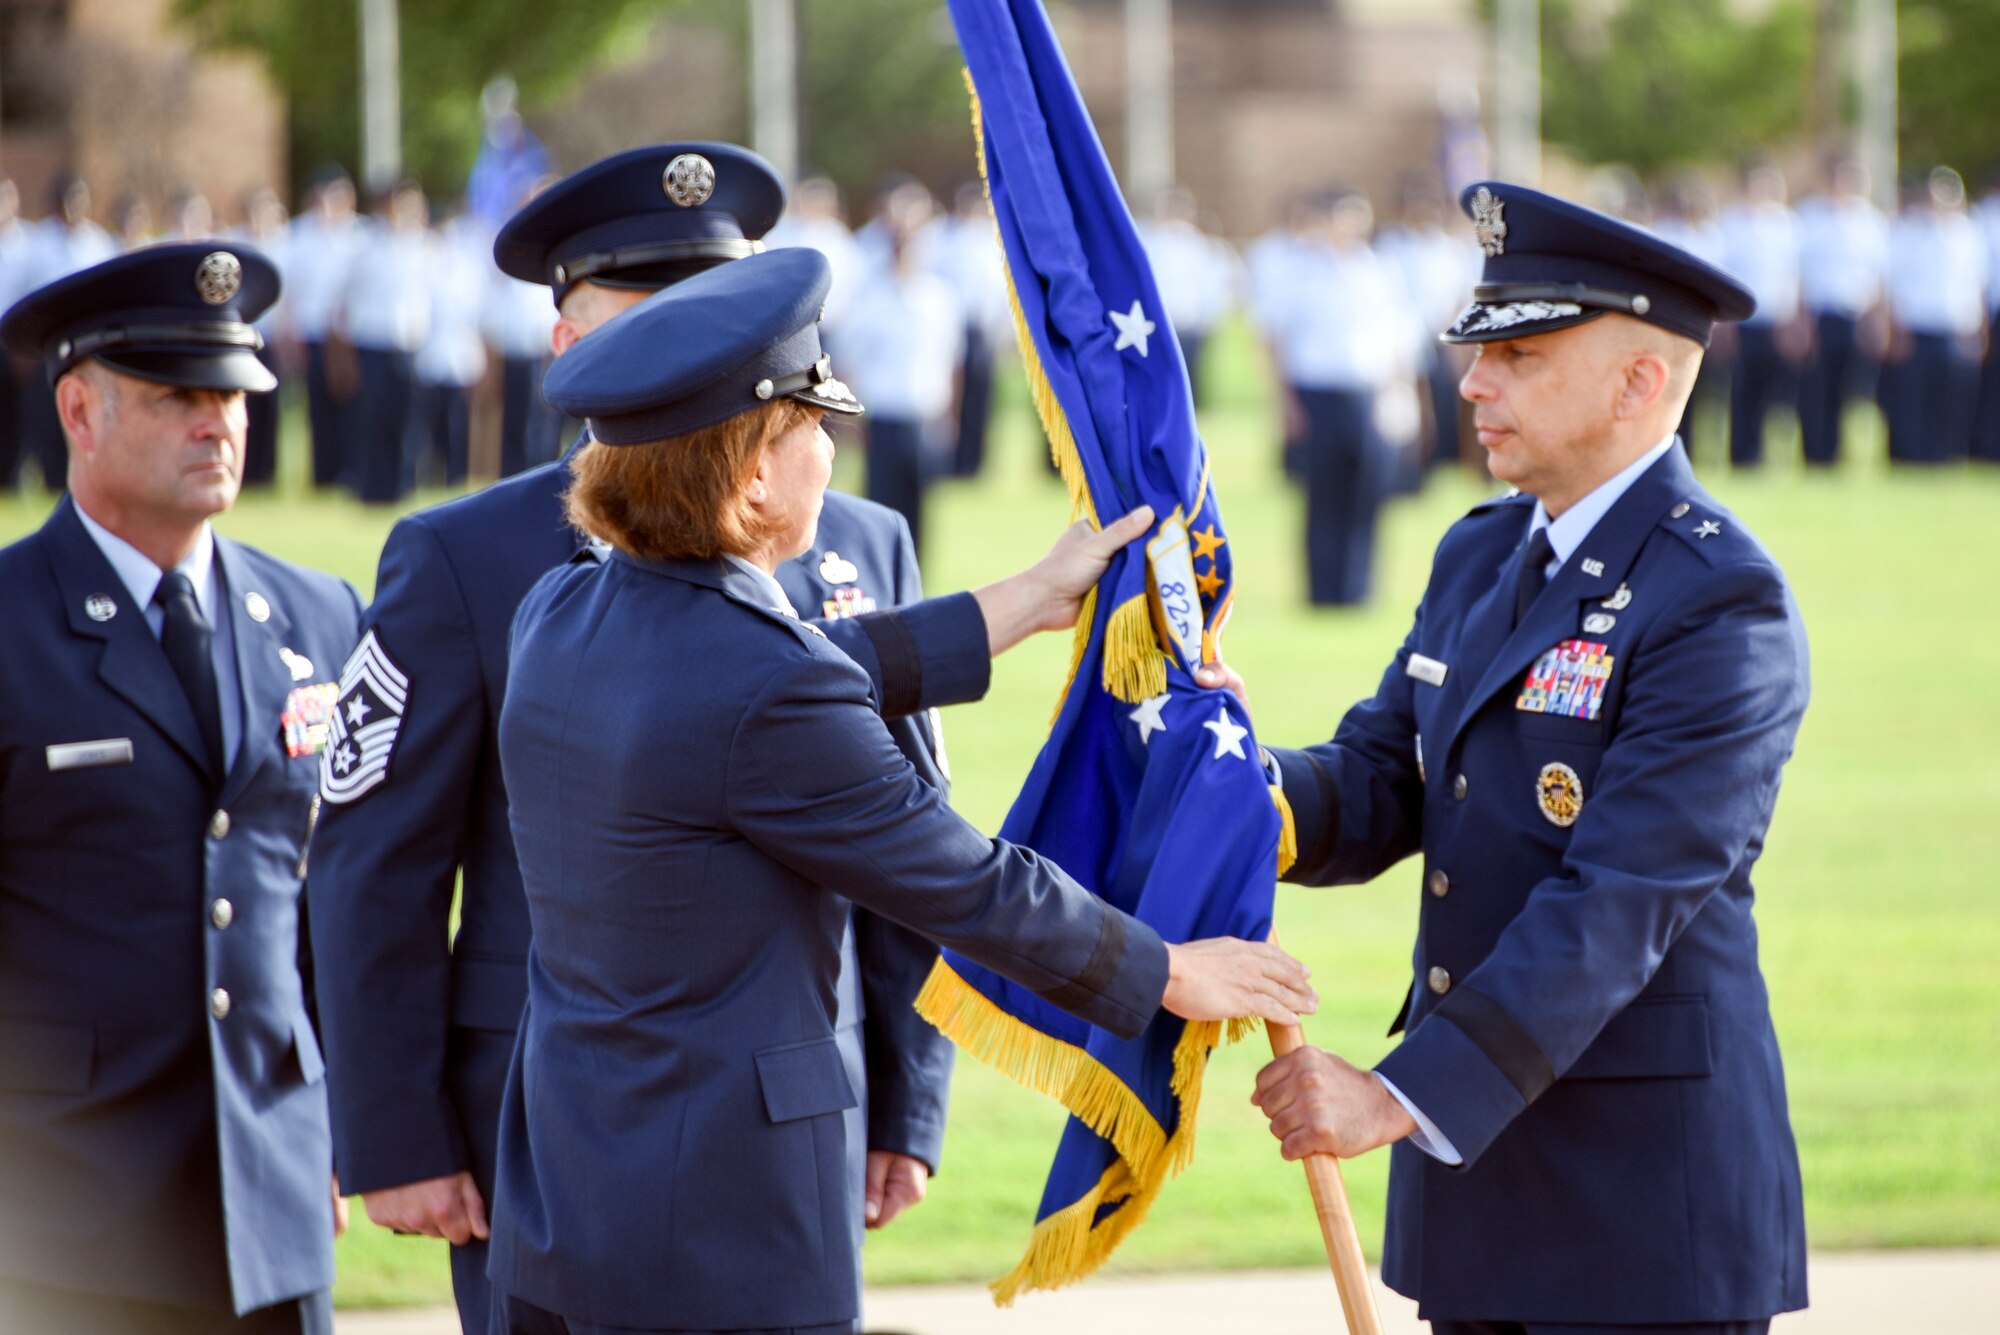 Maj. Gen. Andrea Tullos, 2nd Air Force commander, transfers command of the 82nd Training Wing to Brig. Gen. Lyle K. Drew at Sheppard Air Force Base, Texas, July 15, 2021. The 82nd TRW is the largest technical training installation in the Air Force.